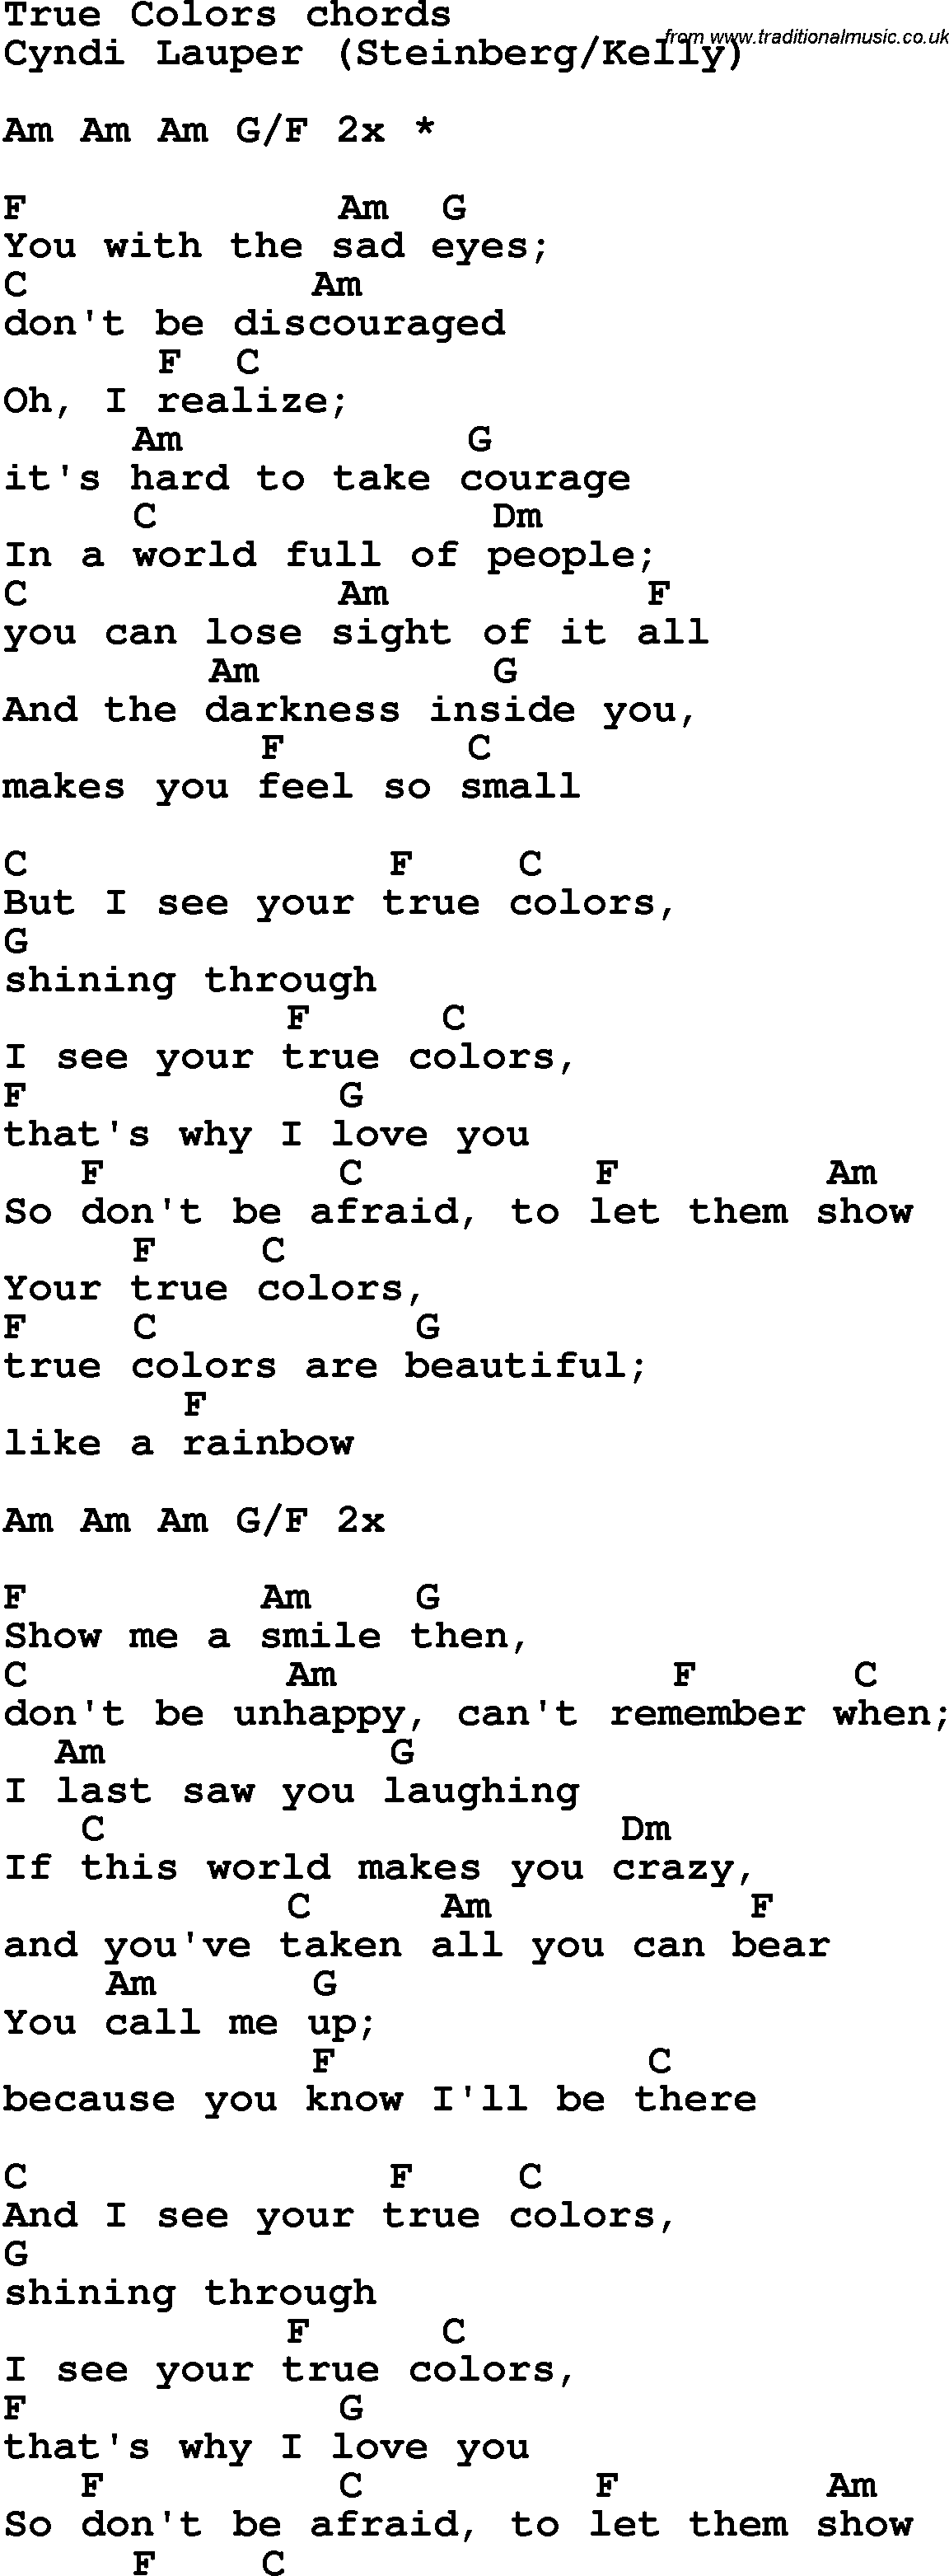 Song Lyrics with guitar chords for True Colors